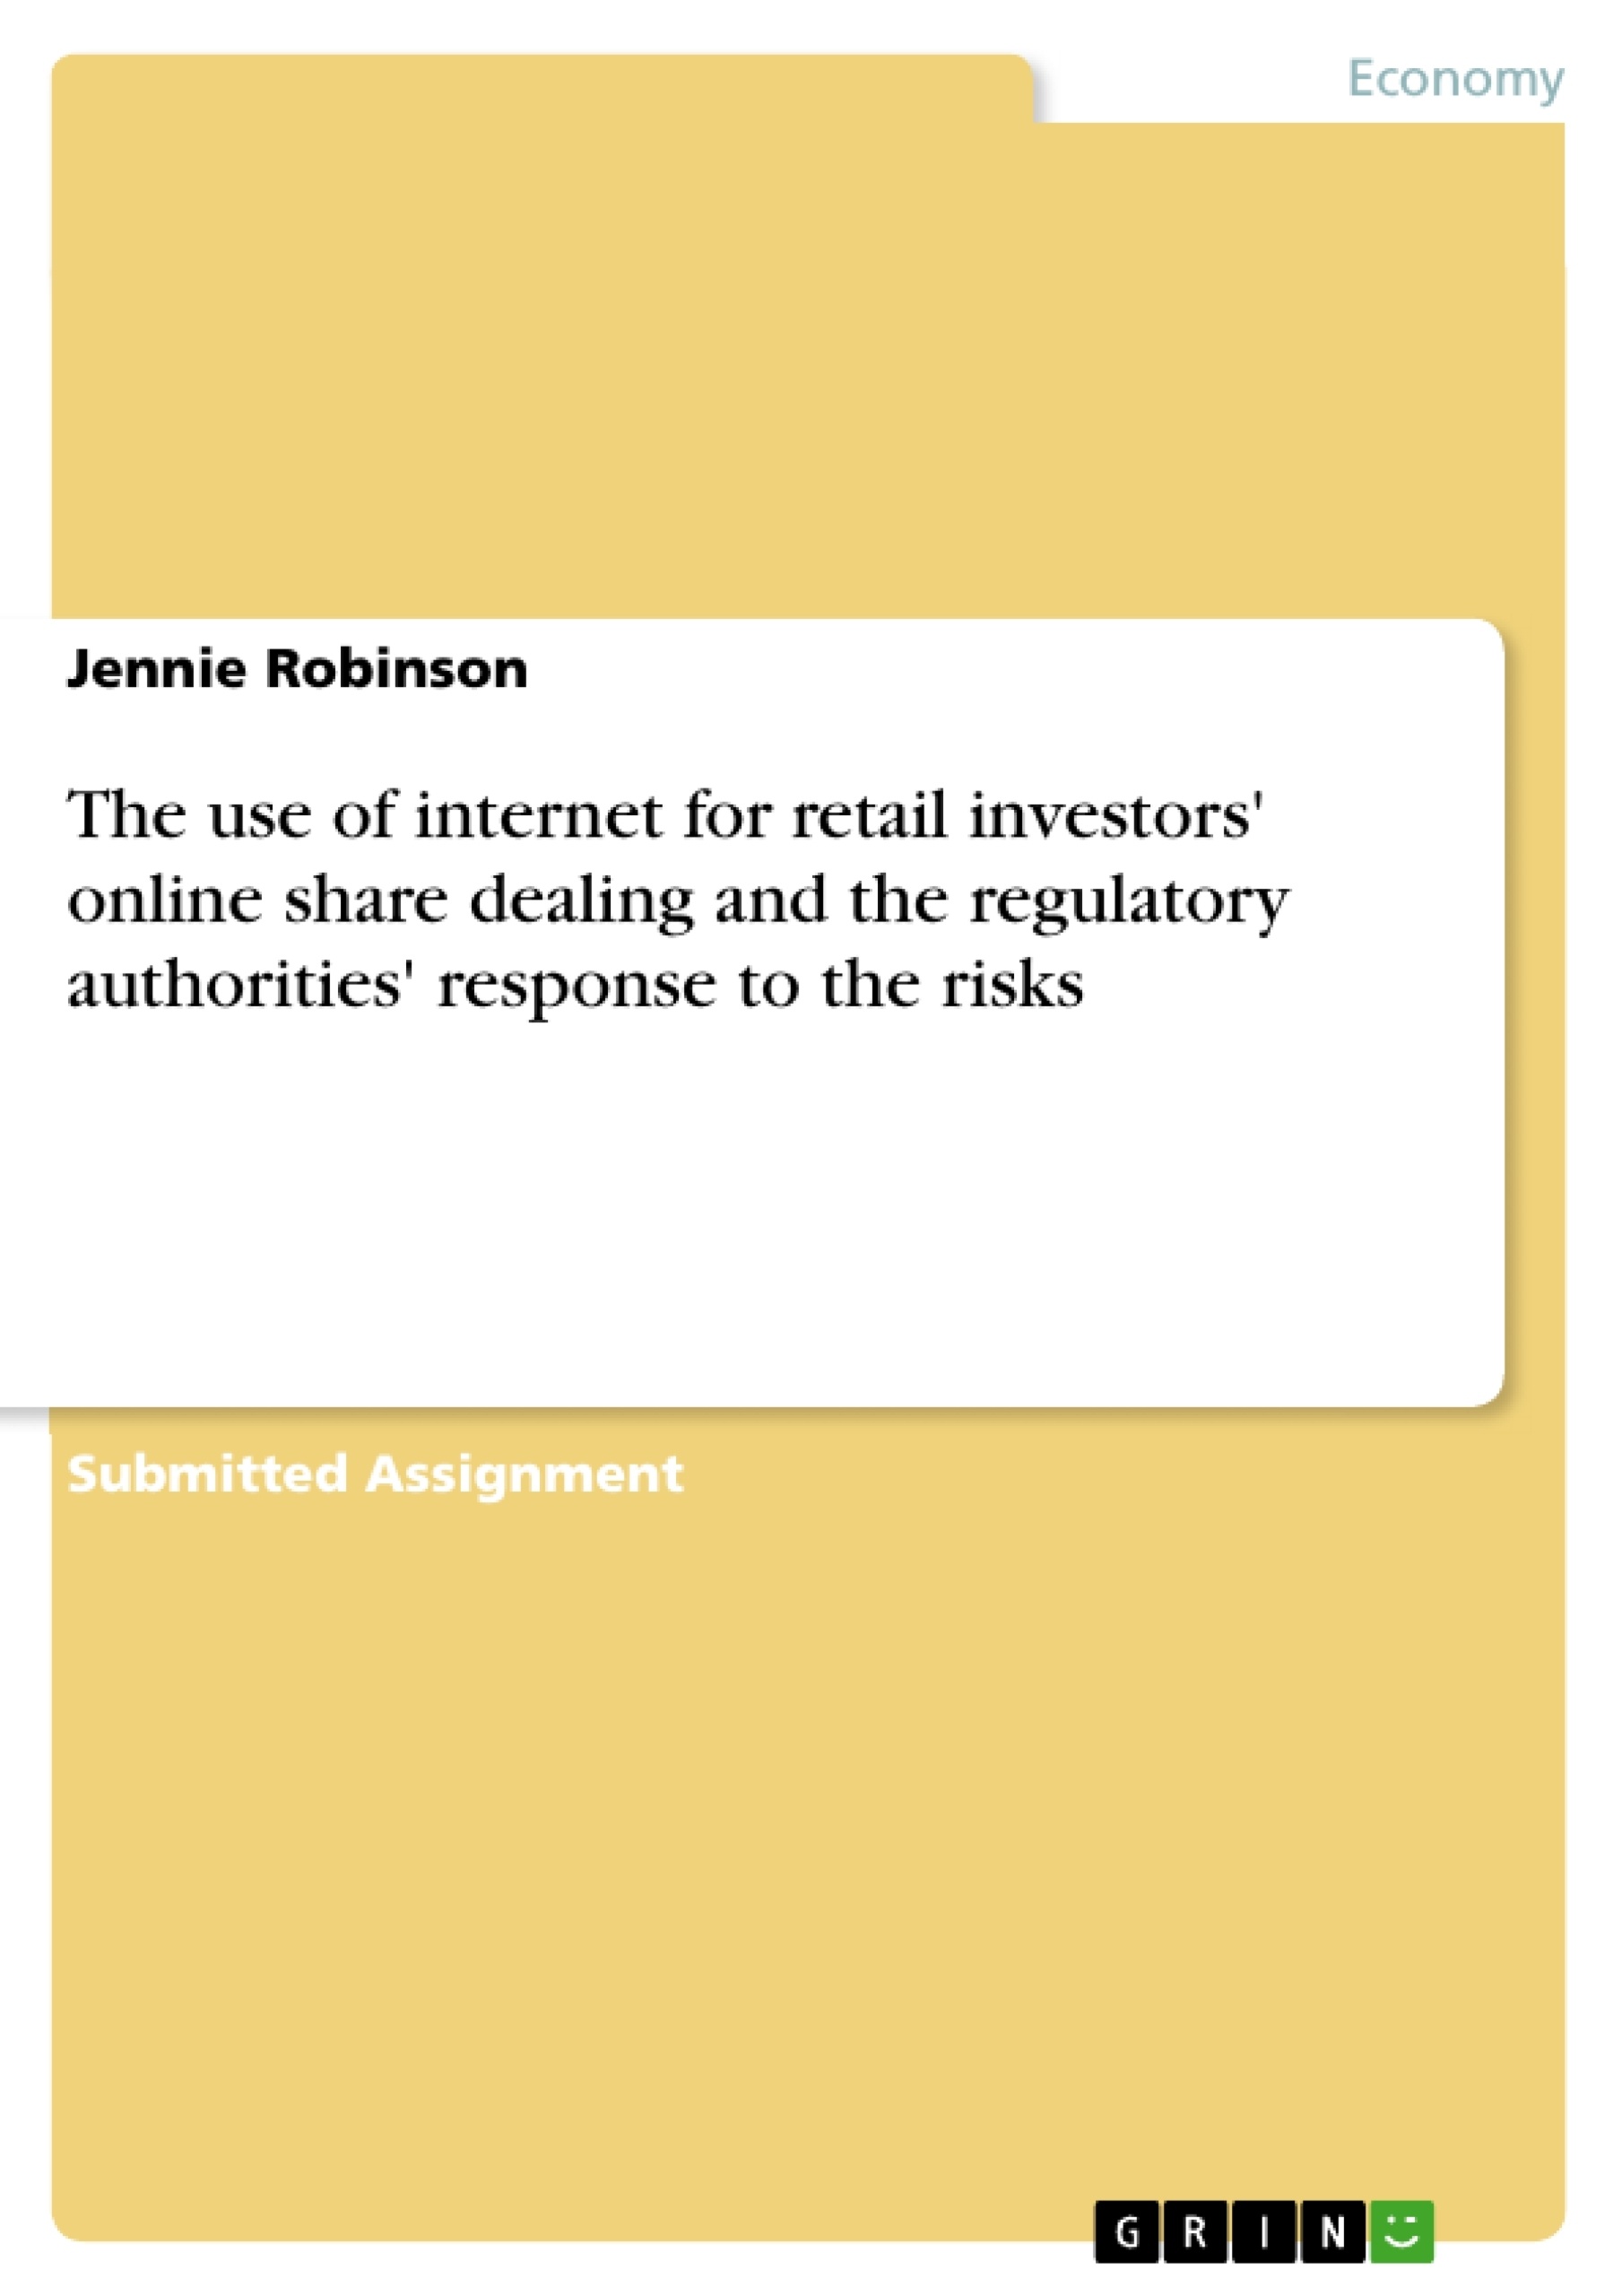 Titre: The use of internet for retail investors' online share dealing and the regulatory authorities' response to the risks